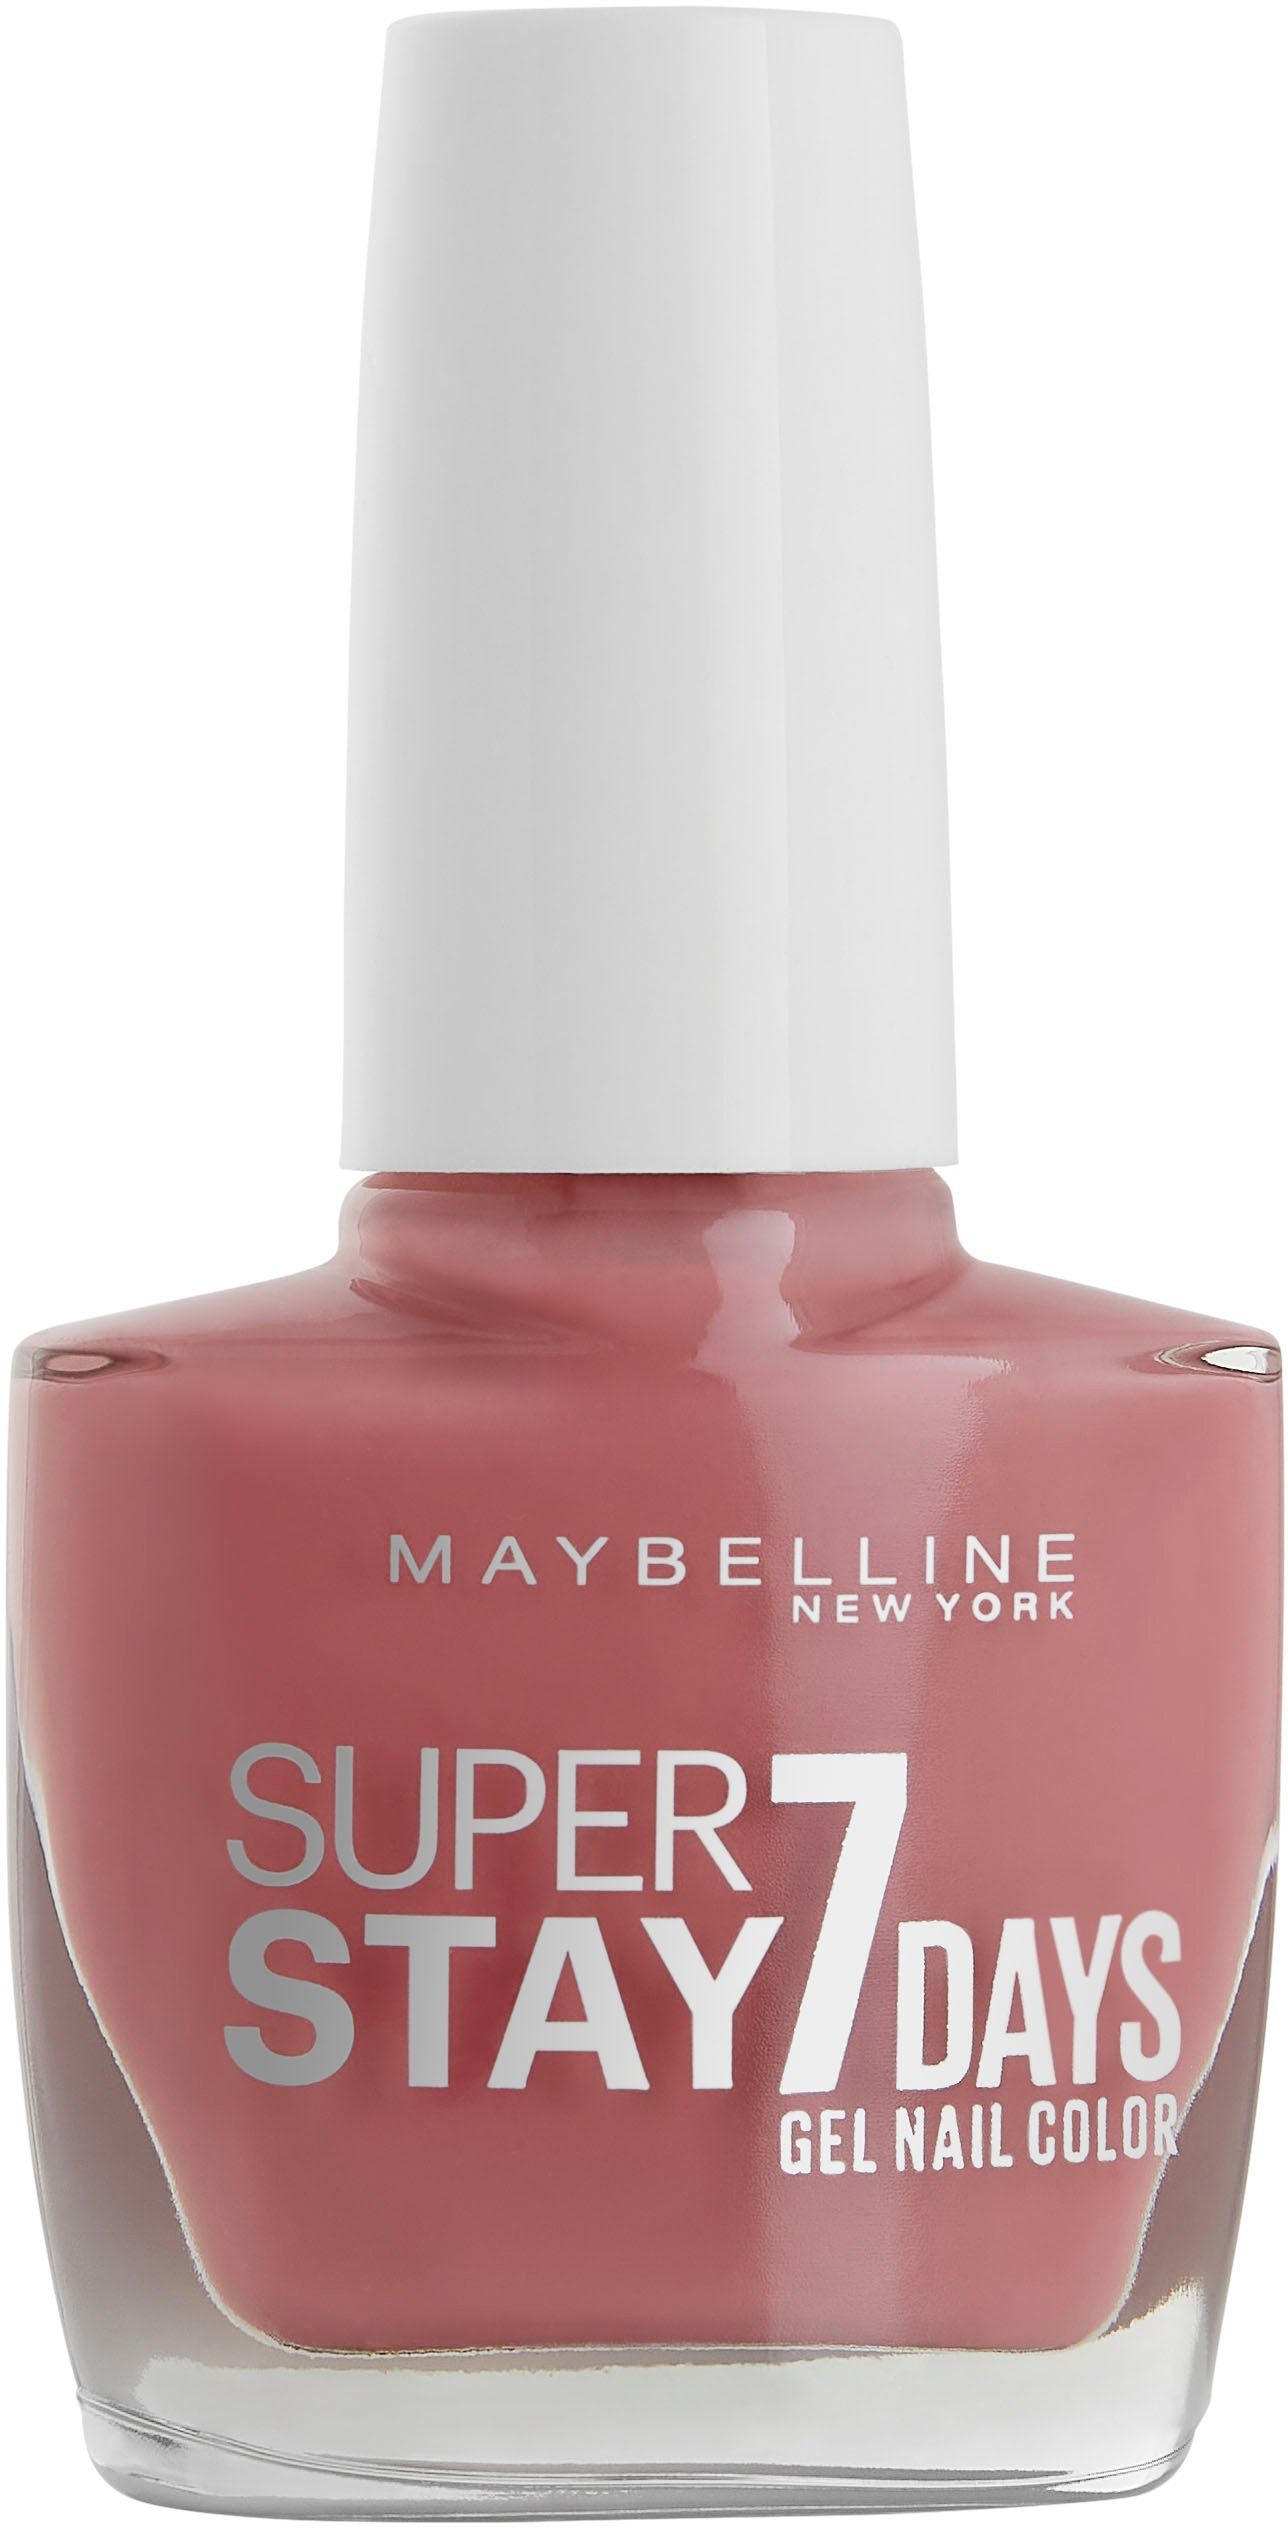 7 about Days Superstay 926 it MAYBELLINE NEW Nagellack YORK Pink Nr.